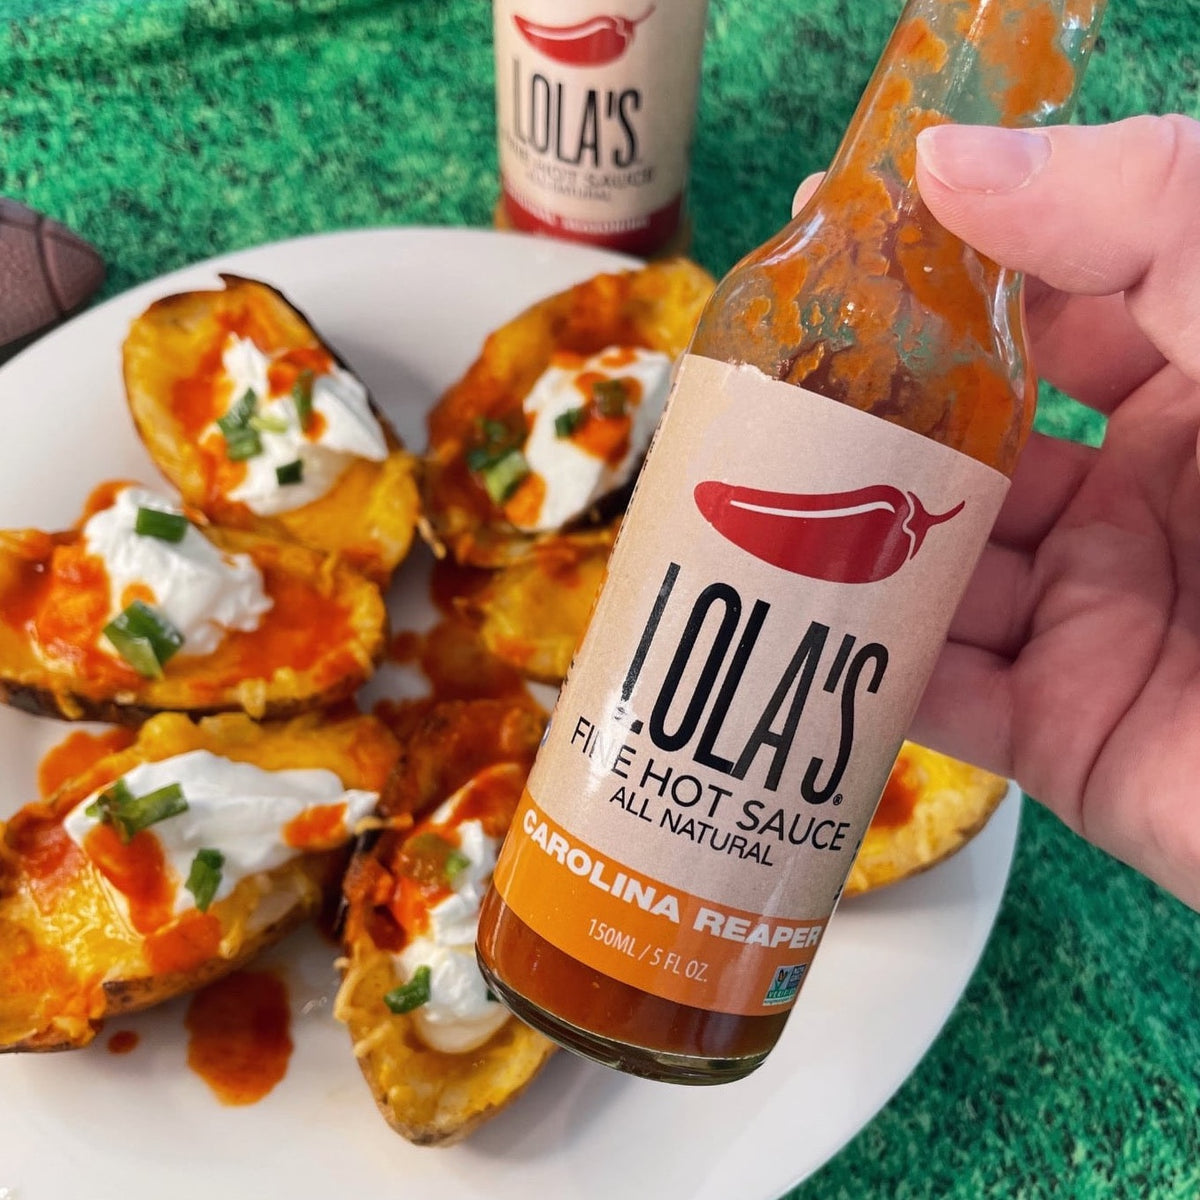 A hand holding Lola's Carolina Reaper Hot Sauce bottle, perfect for pizza, meal prep, or pasta! 5 oz. glass bottle. All-natural, plant-based, keto, low sodium, non-GMO, and gluten-free.